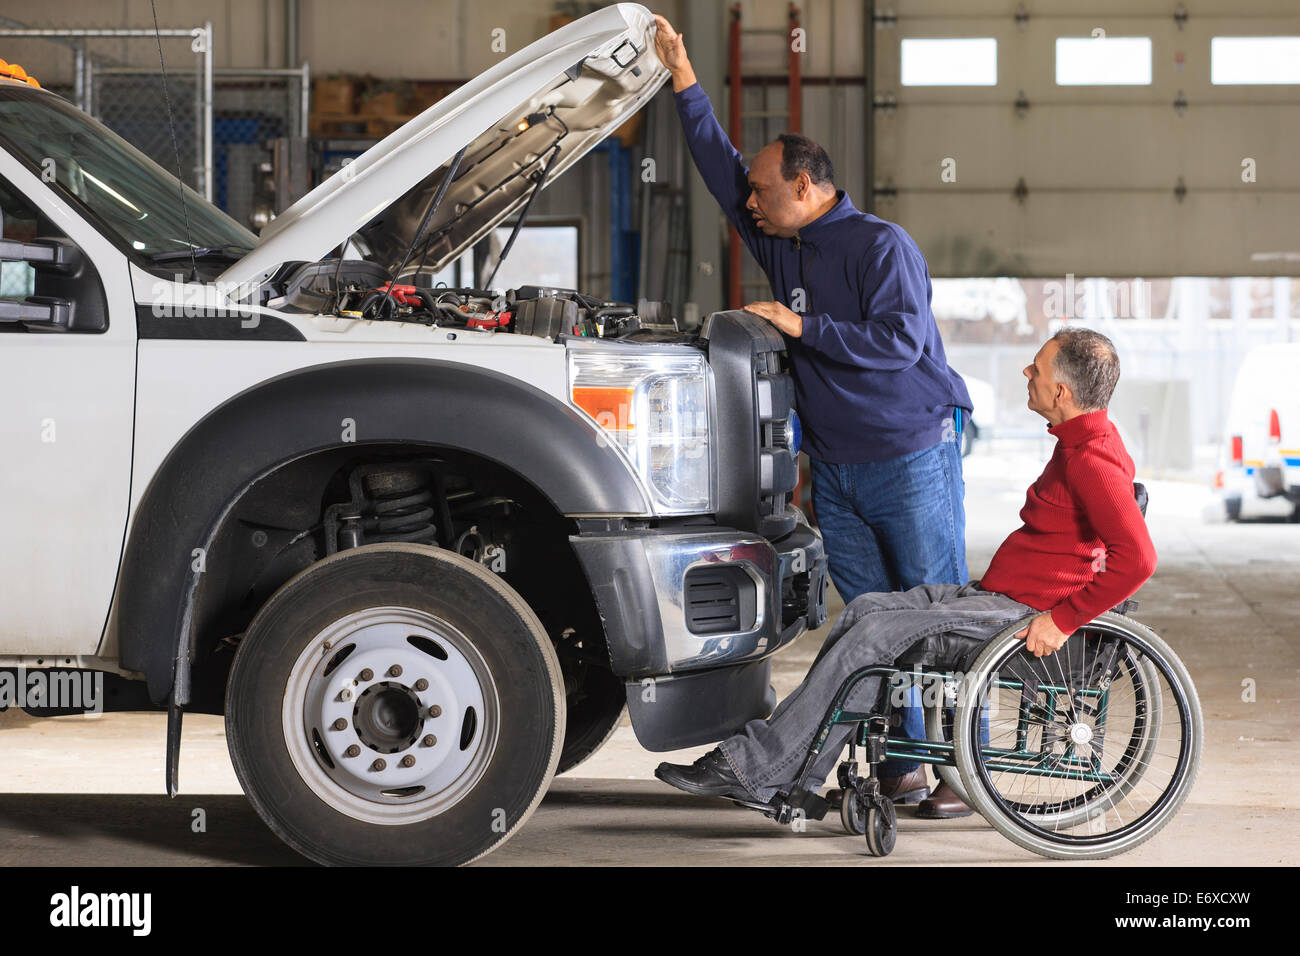 Automotive maintenance technician and supervisor with spinal cord injury in truck garage Stock Photo